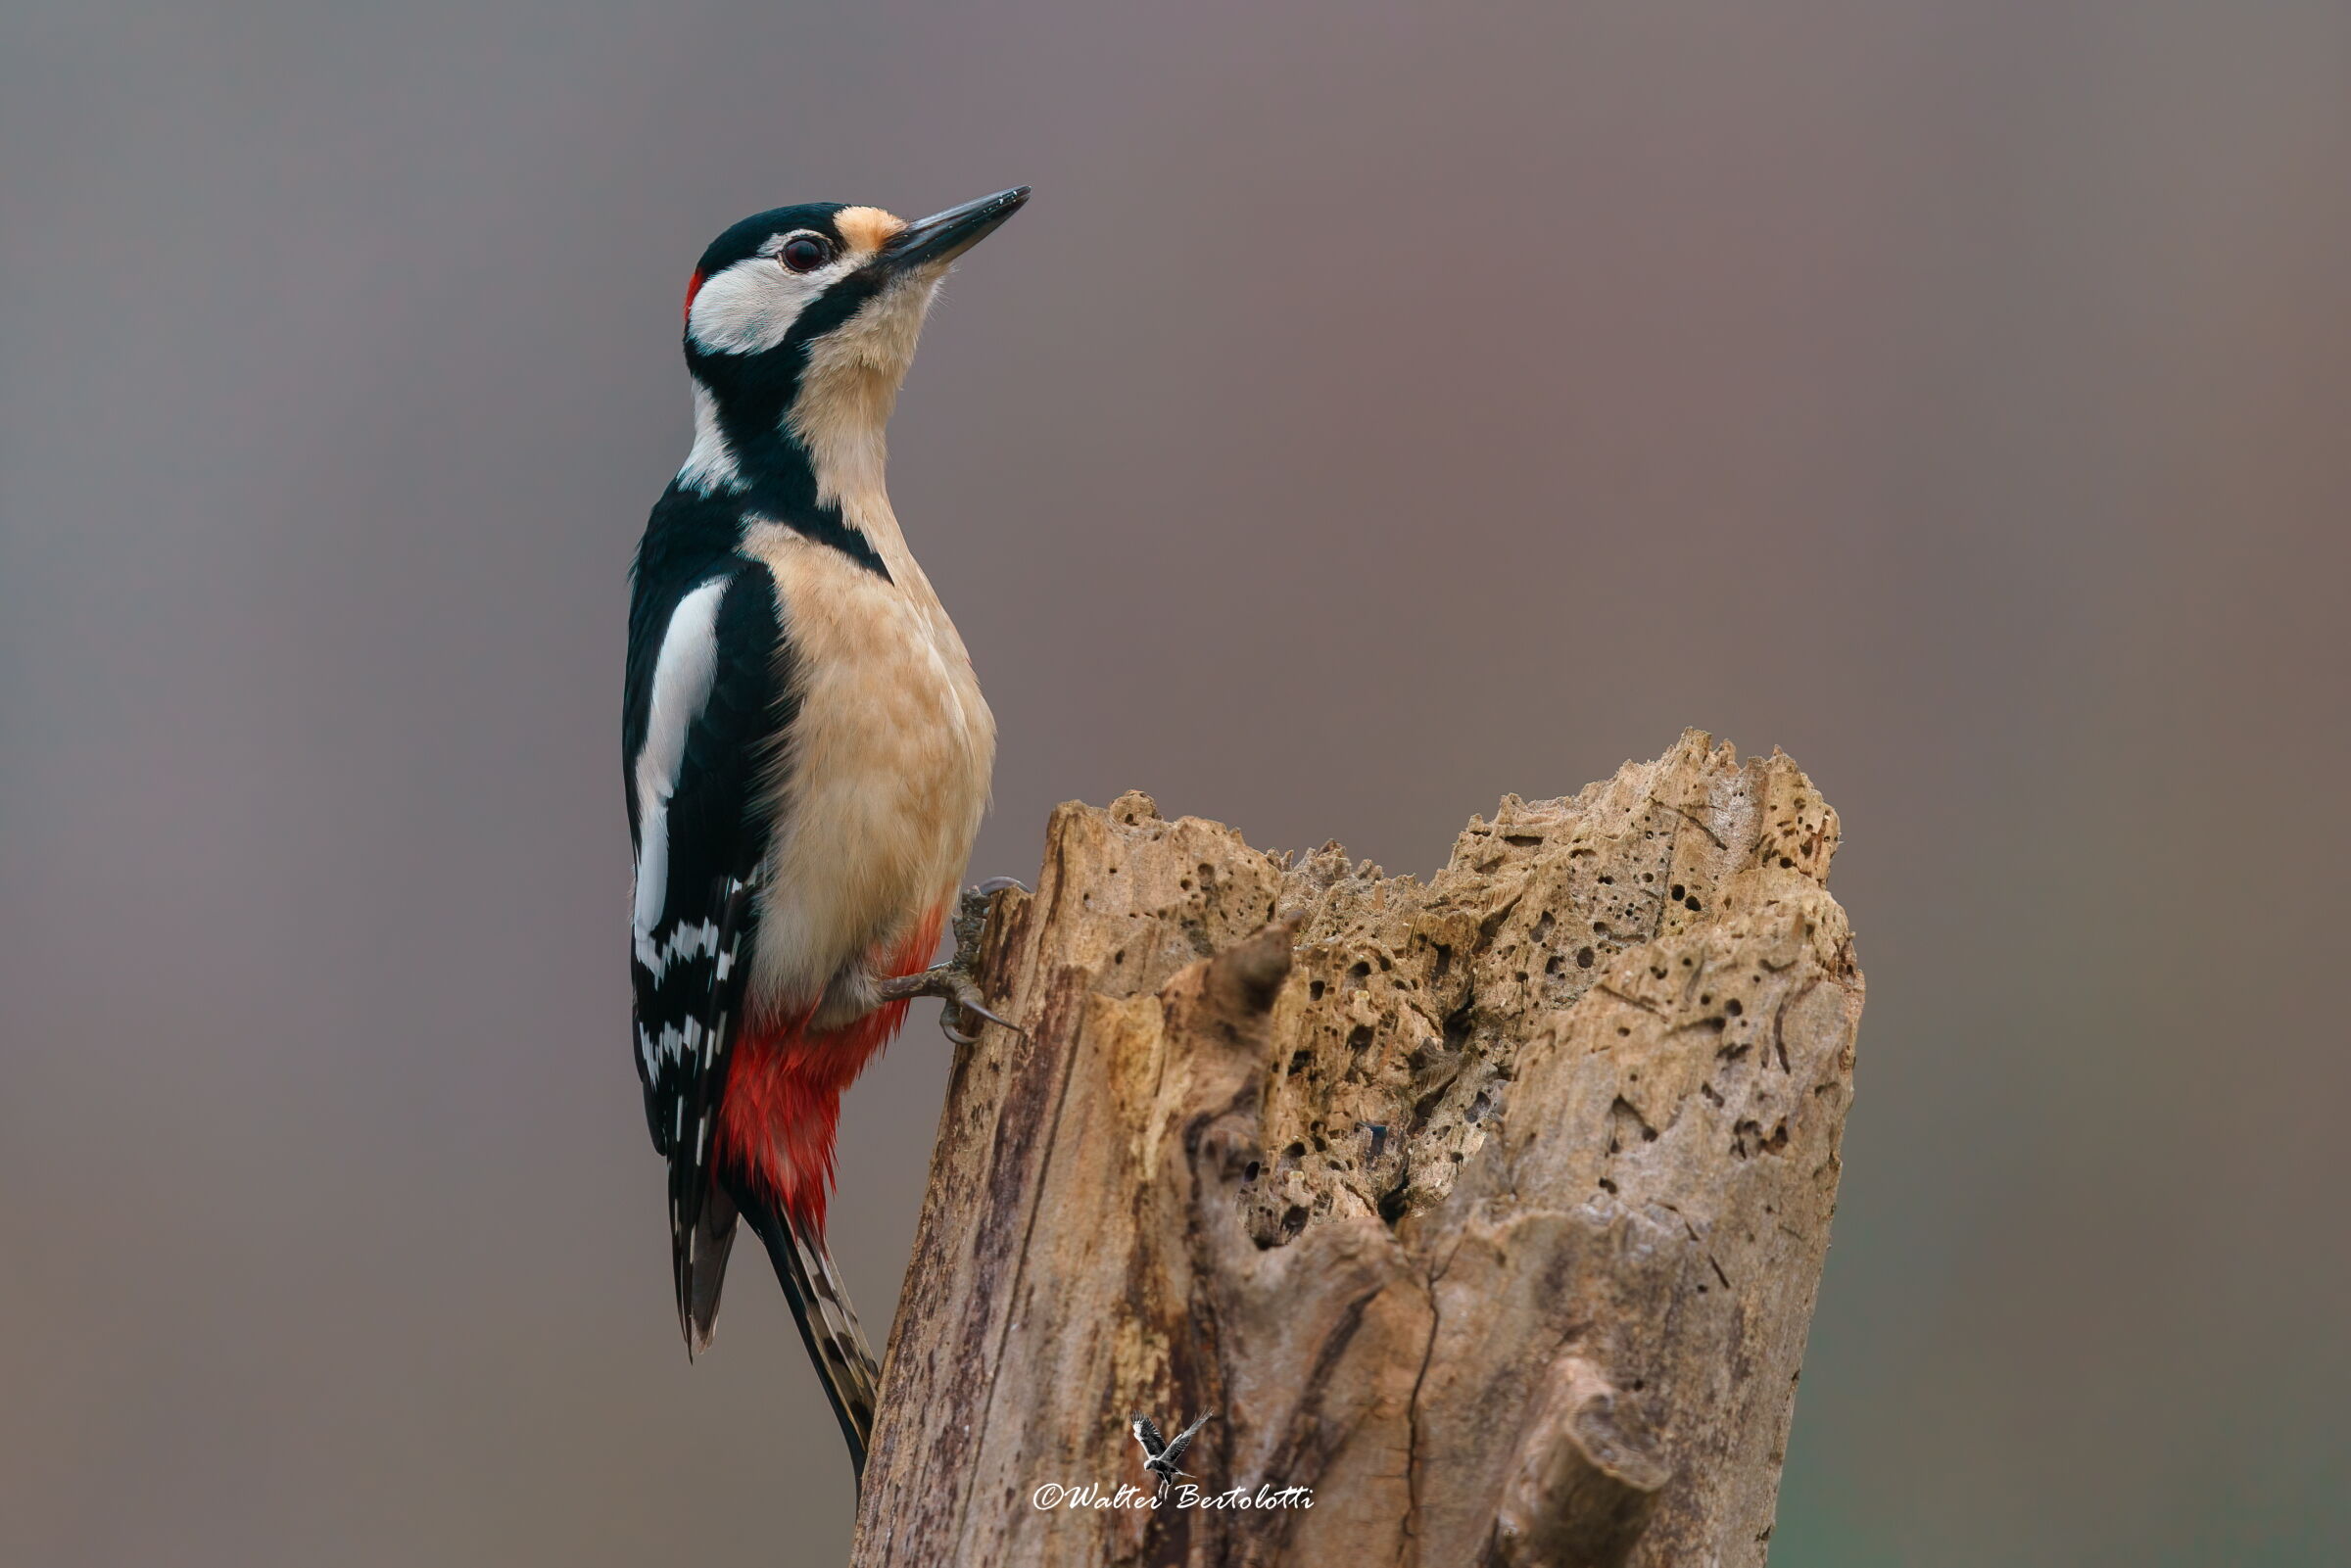 the red woodpecker posing...